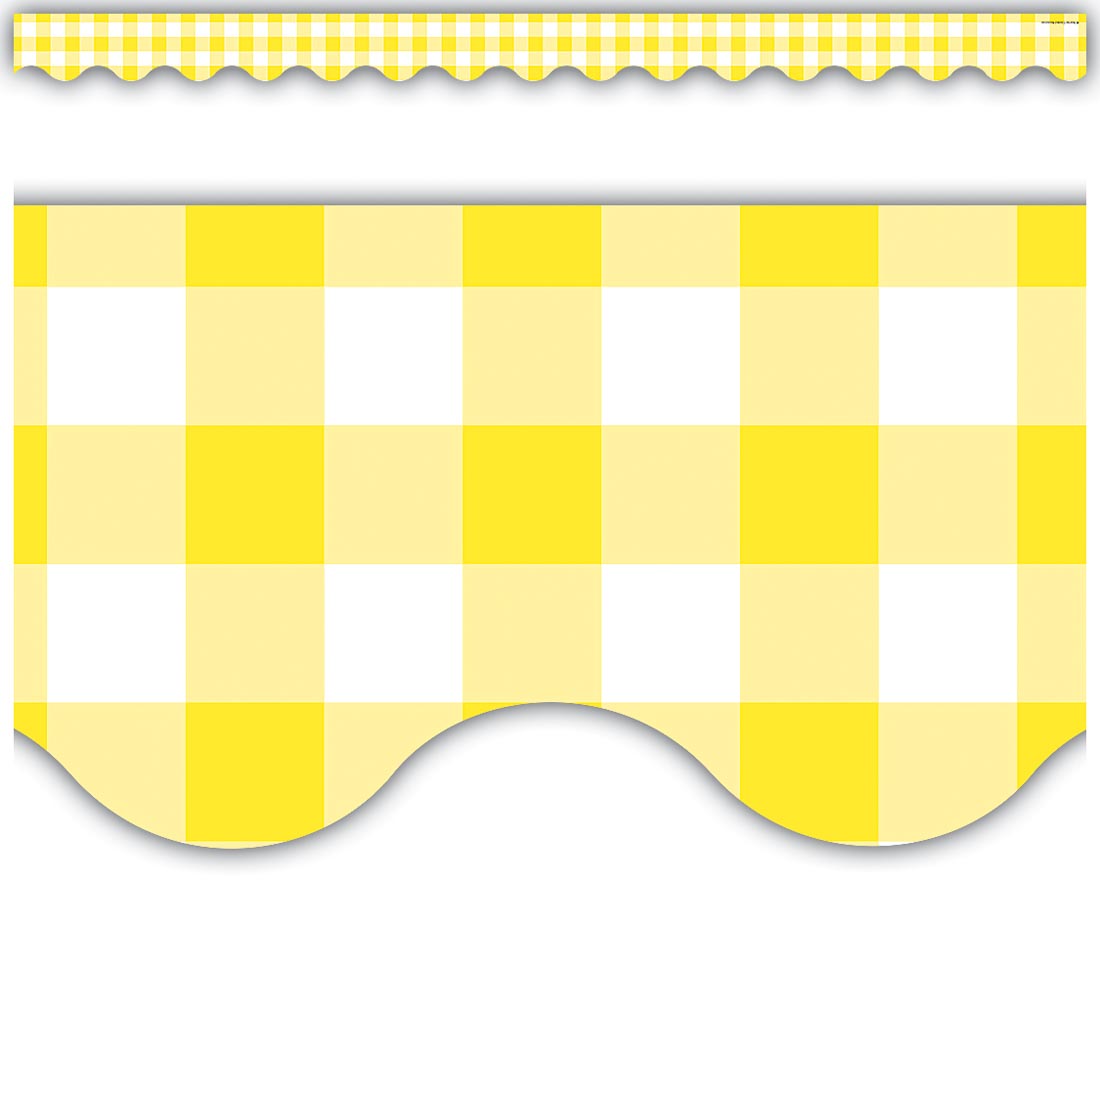 Full view and closeup of the Yellow Gingham Scalloped Border Trim